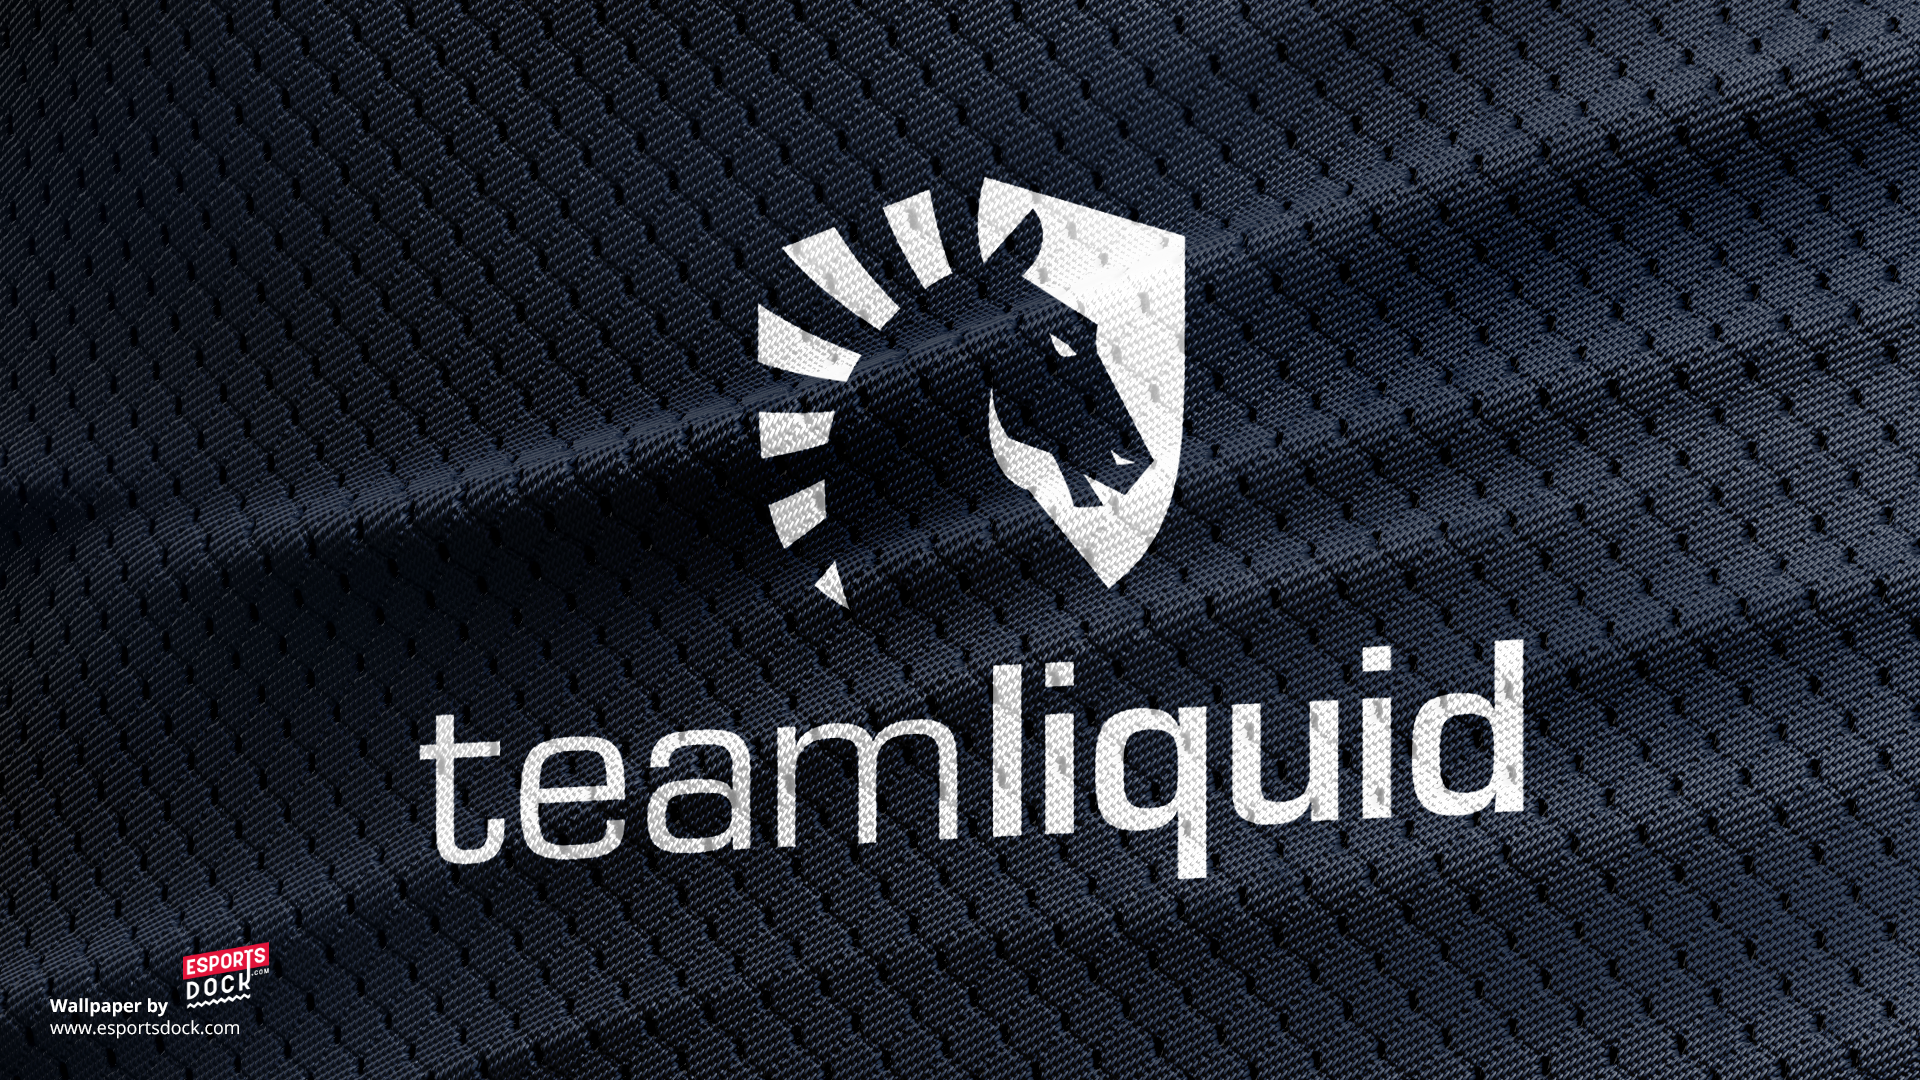 Know the next changes of team liquid